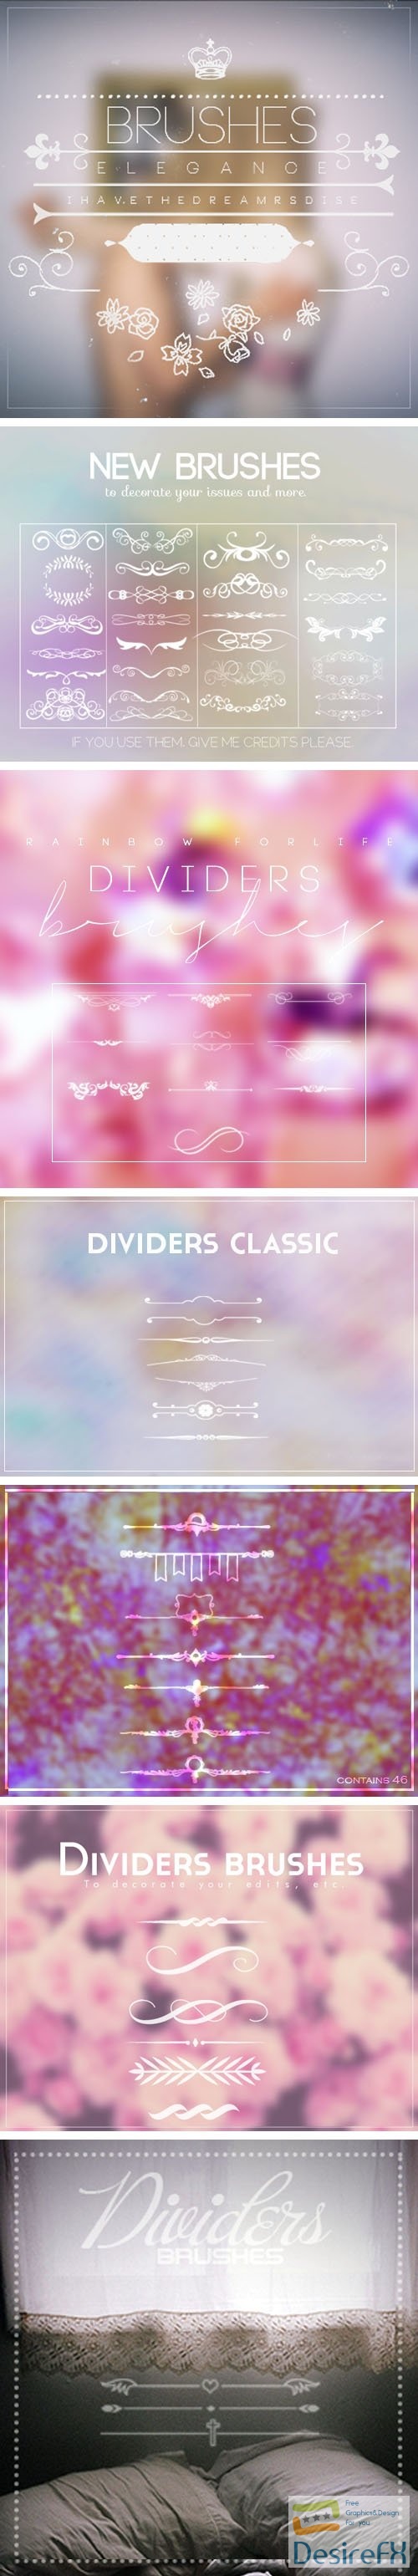 100+ Dividers Brushes for Photoshop